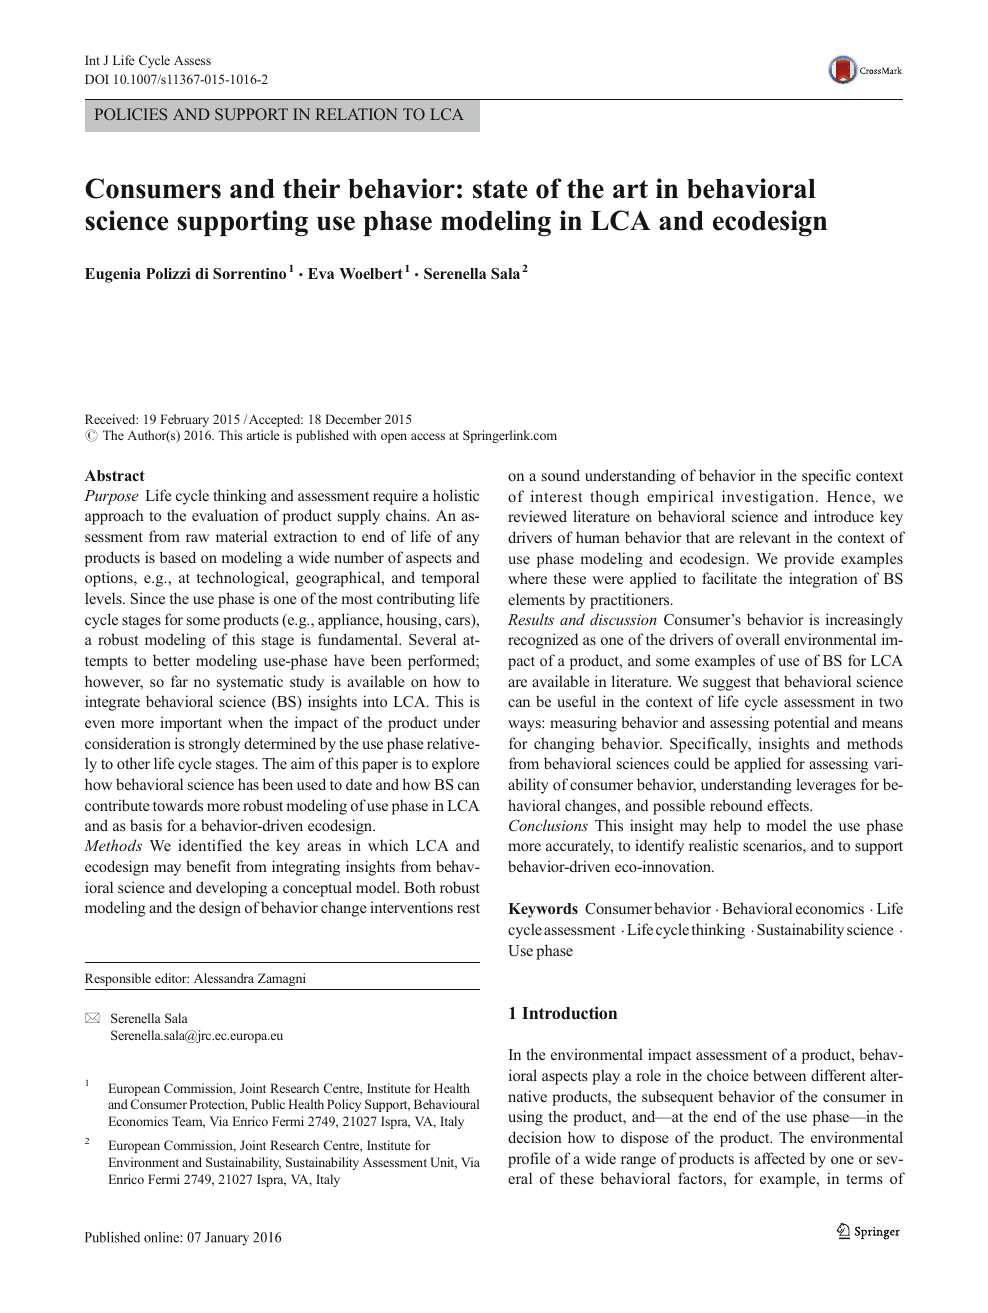 Consumers And Their Behavior State Of The Art In Behavioral Science Supporting Use Phase Modeling In Lca And Ecodesign Topic Of Research Paper In Economics And Business Download Scholarly Article Pdf